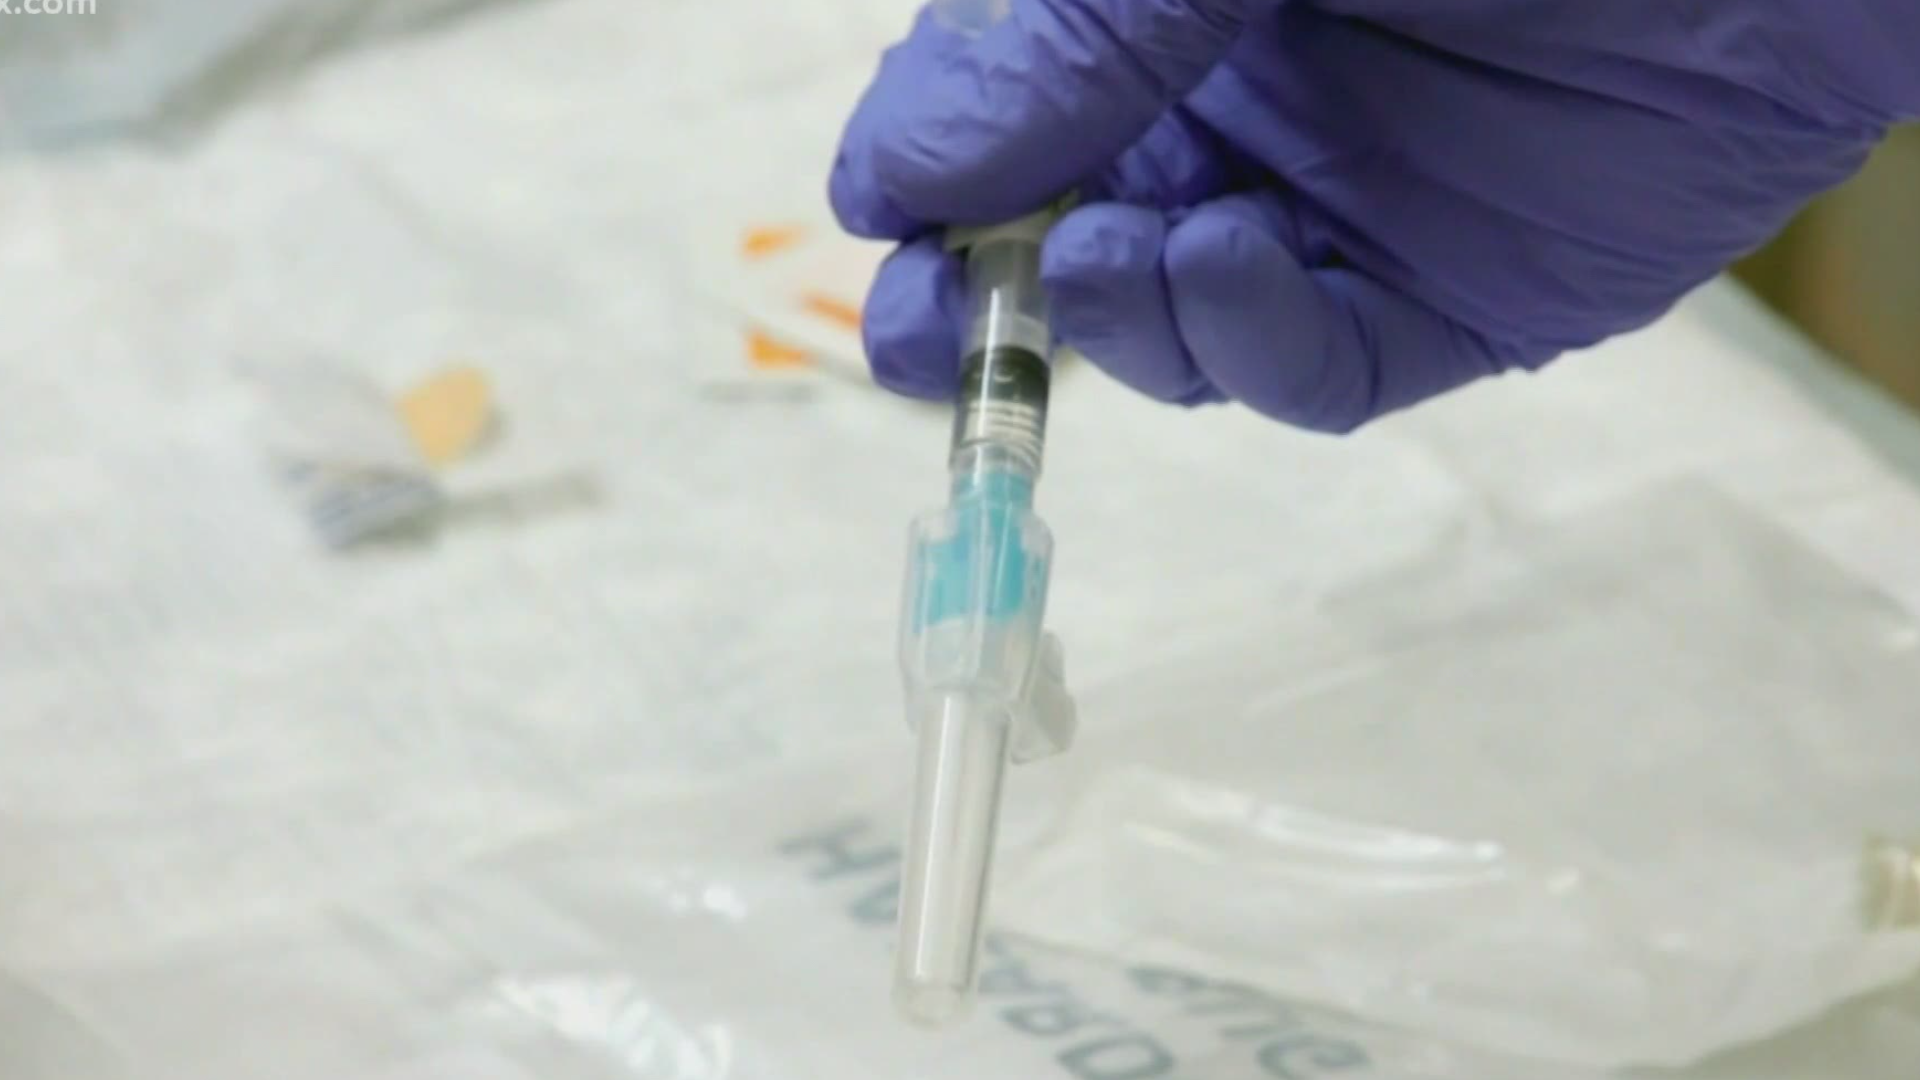 South Carolina's health agency has put out its plan to release the coronavirus vaccine as soon as its ready.